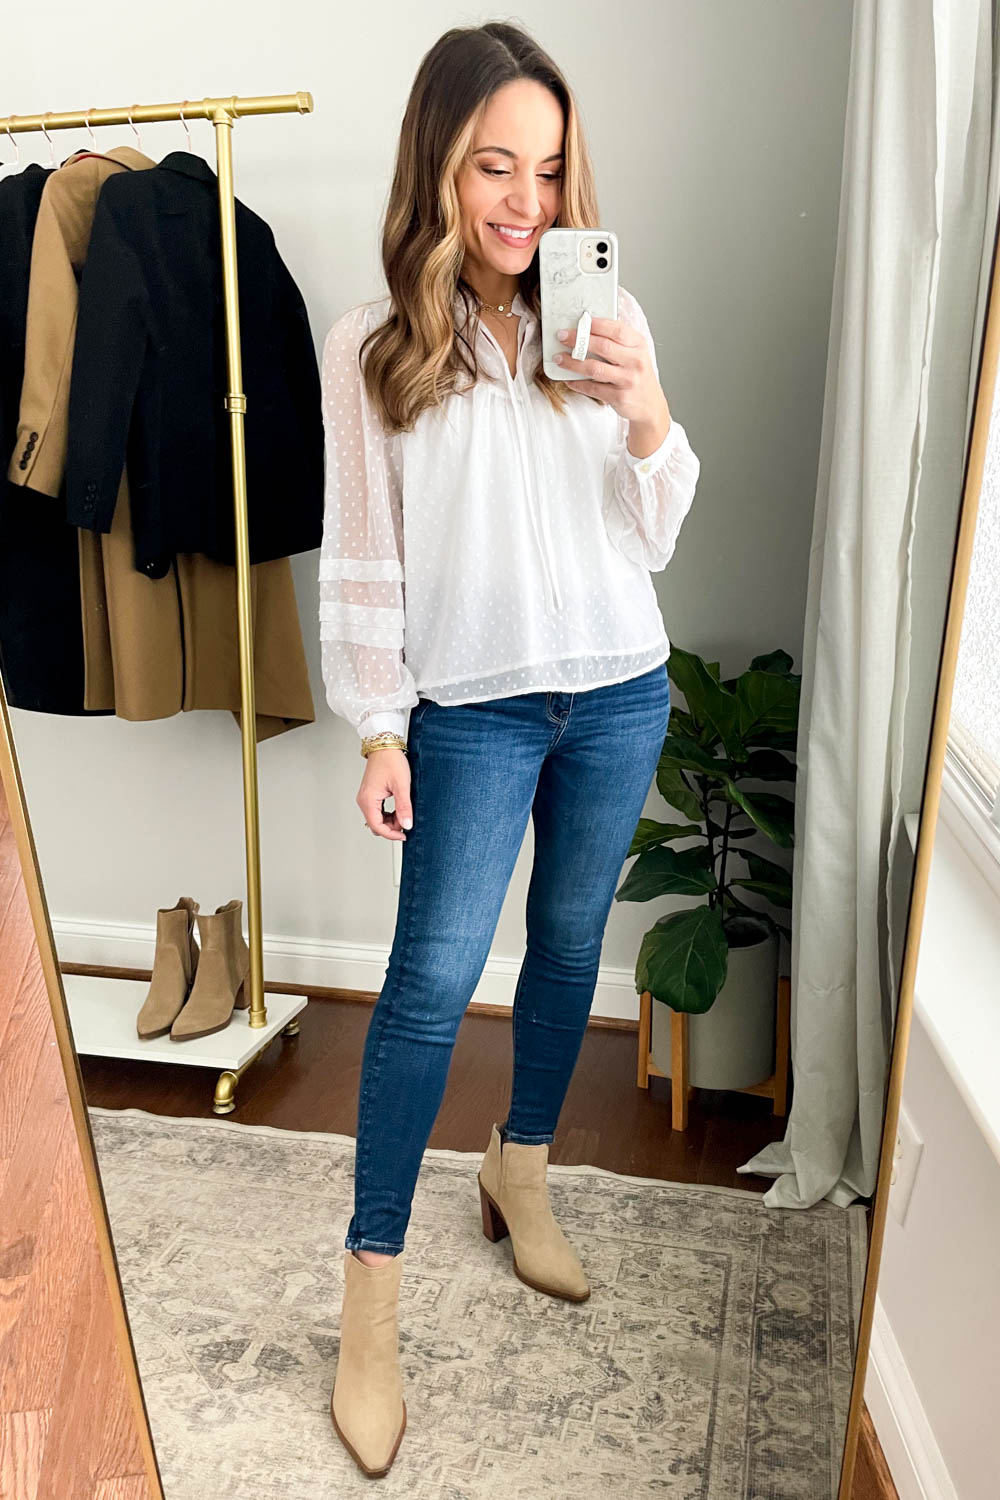 A Guide to Wearing Jeans for Petites - 5 Styling Do's and Don'ts